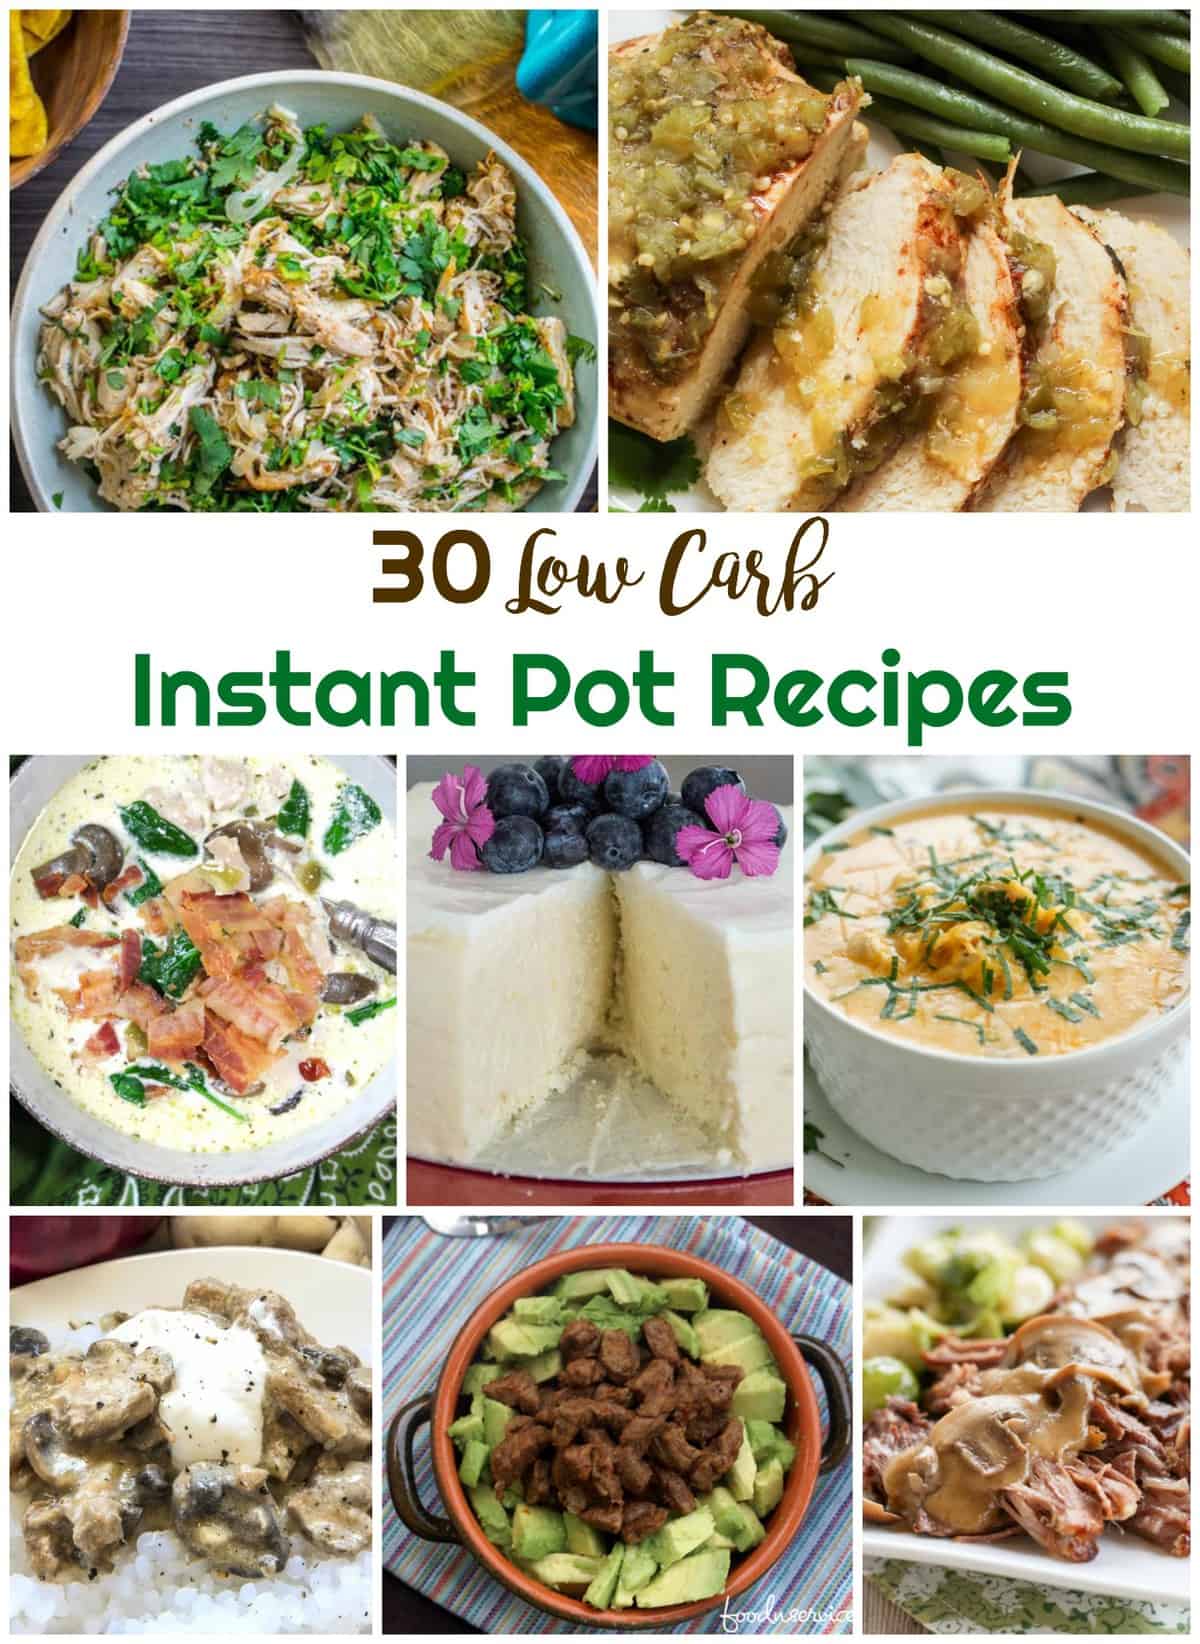 Low Carb Instant Pot Recipes | Healthy Living in Body and Mind